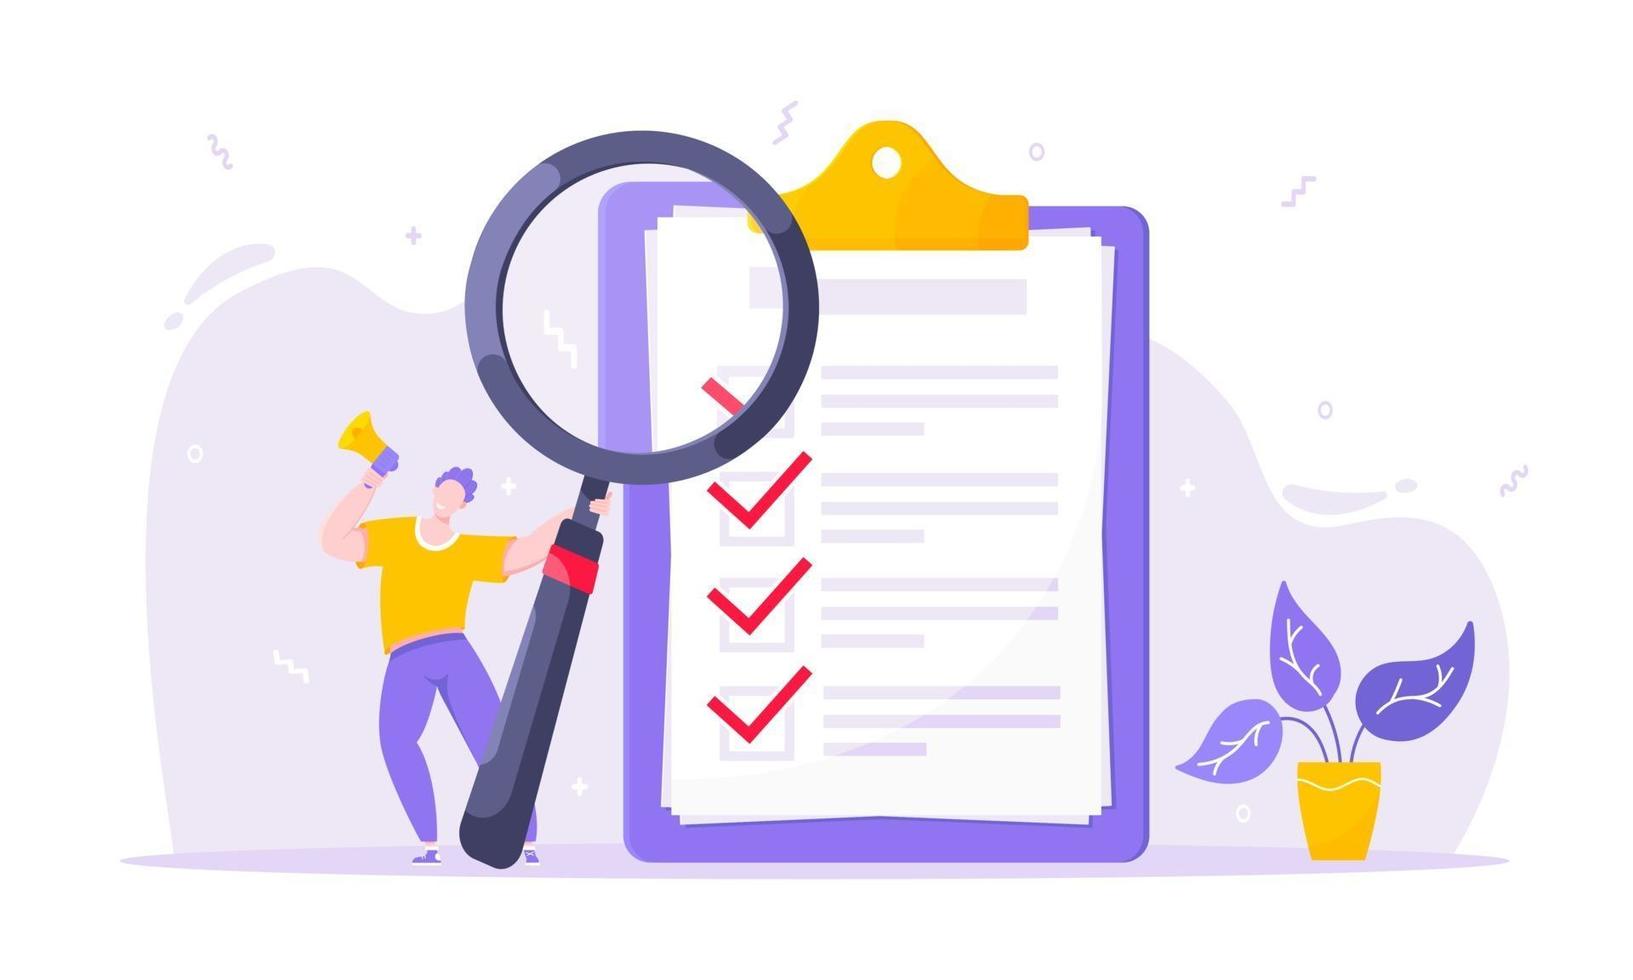 Task done business concept tiny person with megaphone, magnifying glass nearby giant clipboard complete checklist. vector